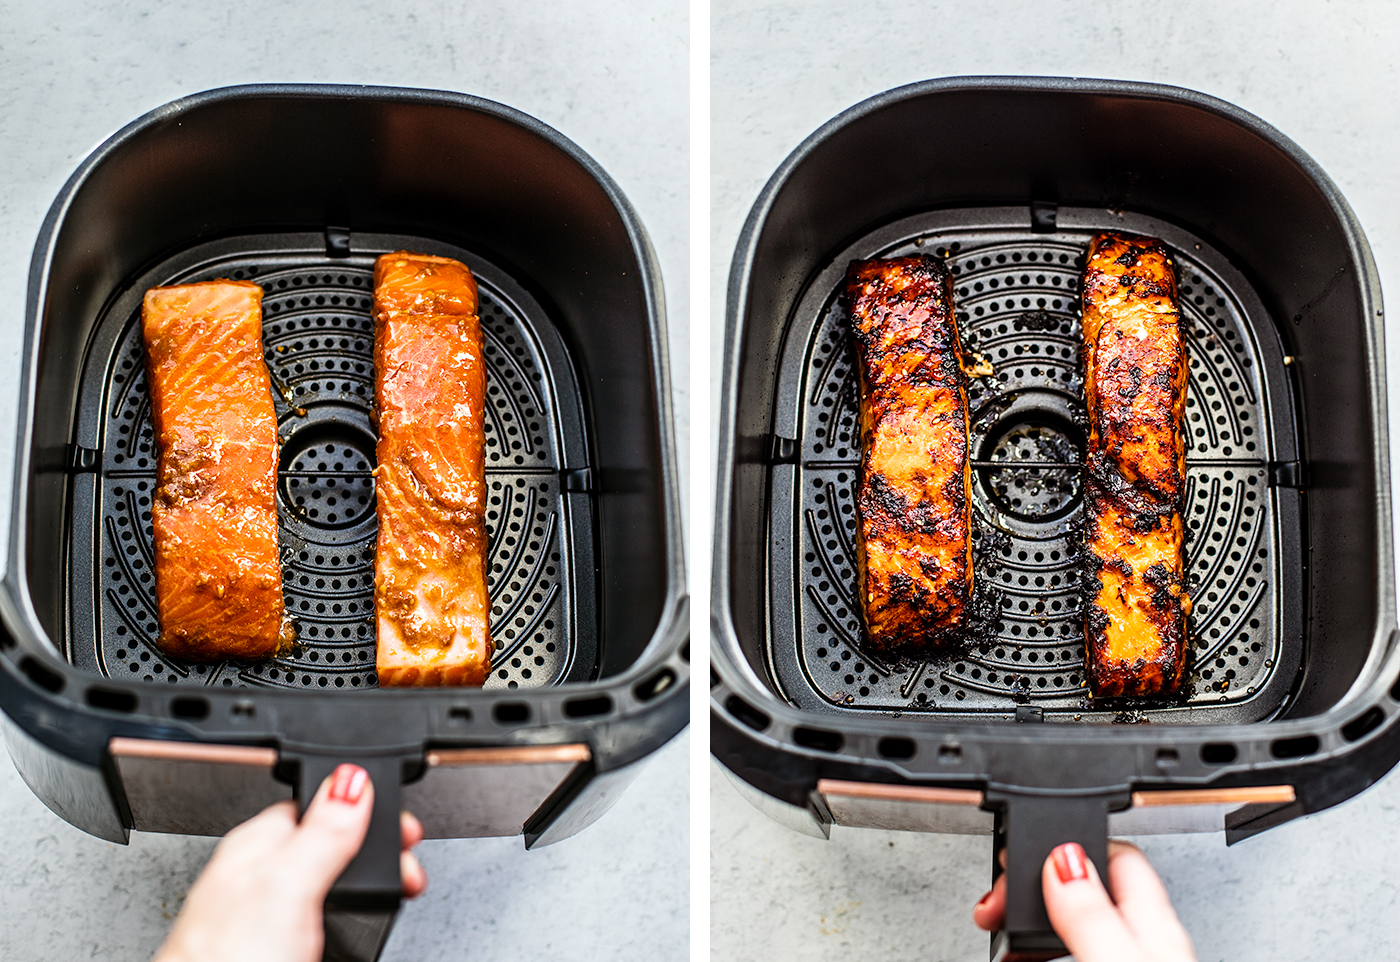 Left: uncooked salmon fillets in air fryer basket; Right: cooked salmon fillets with caramelization.